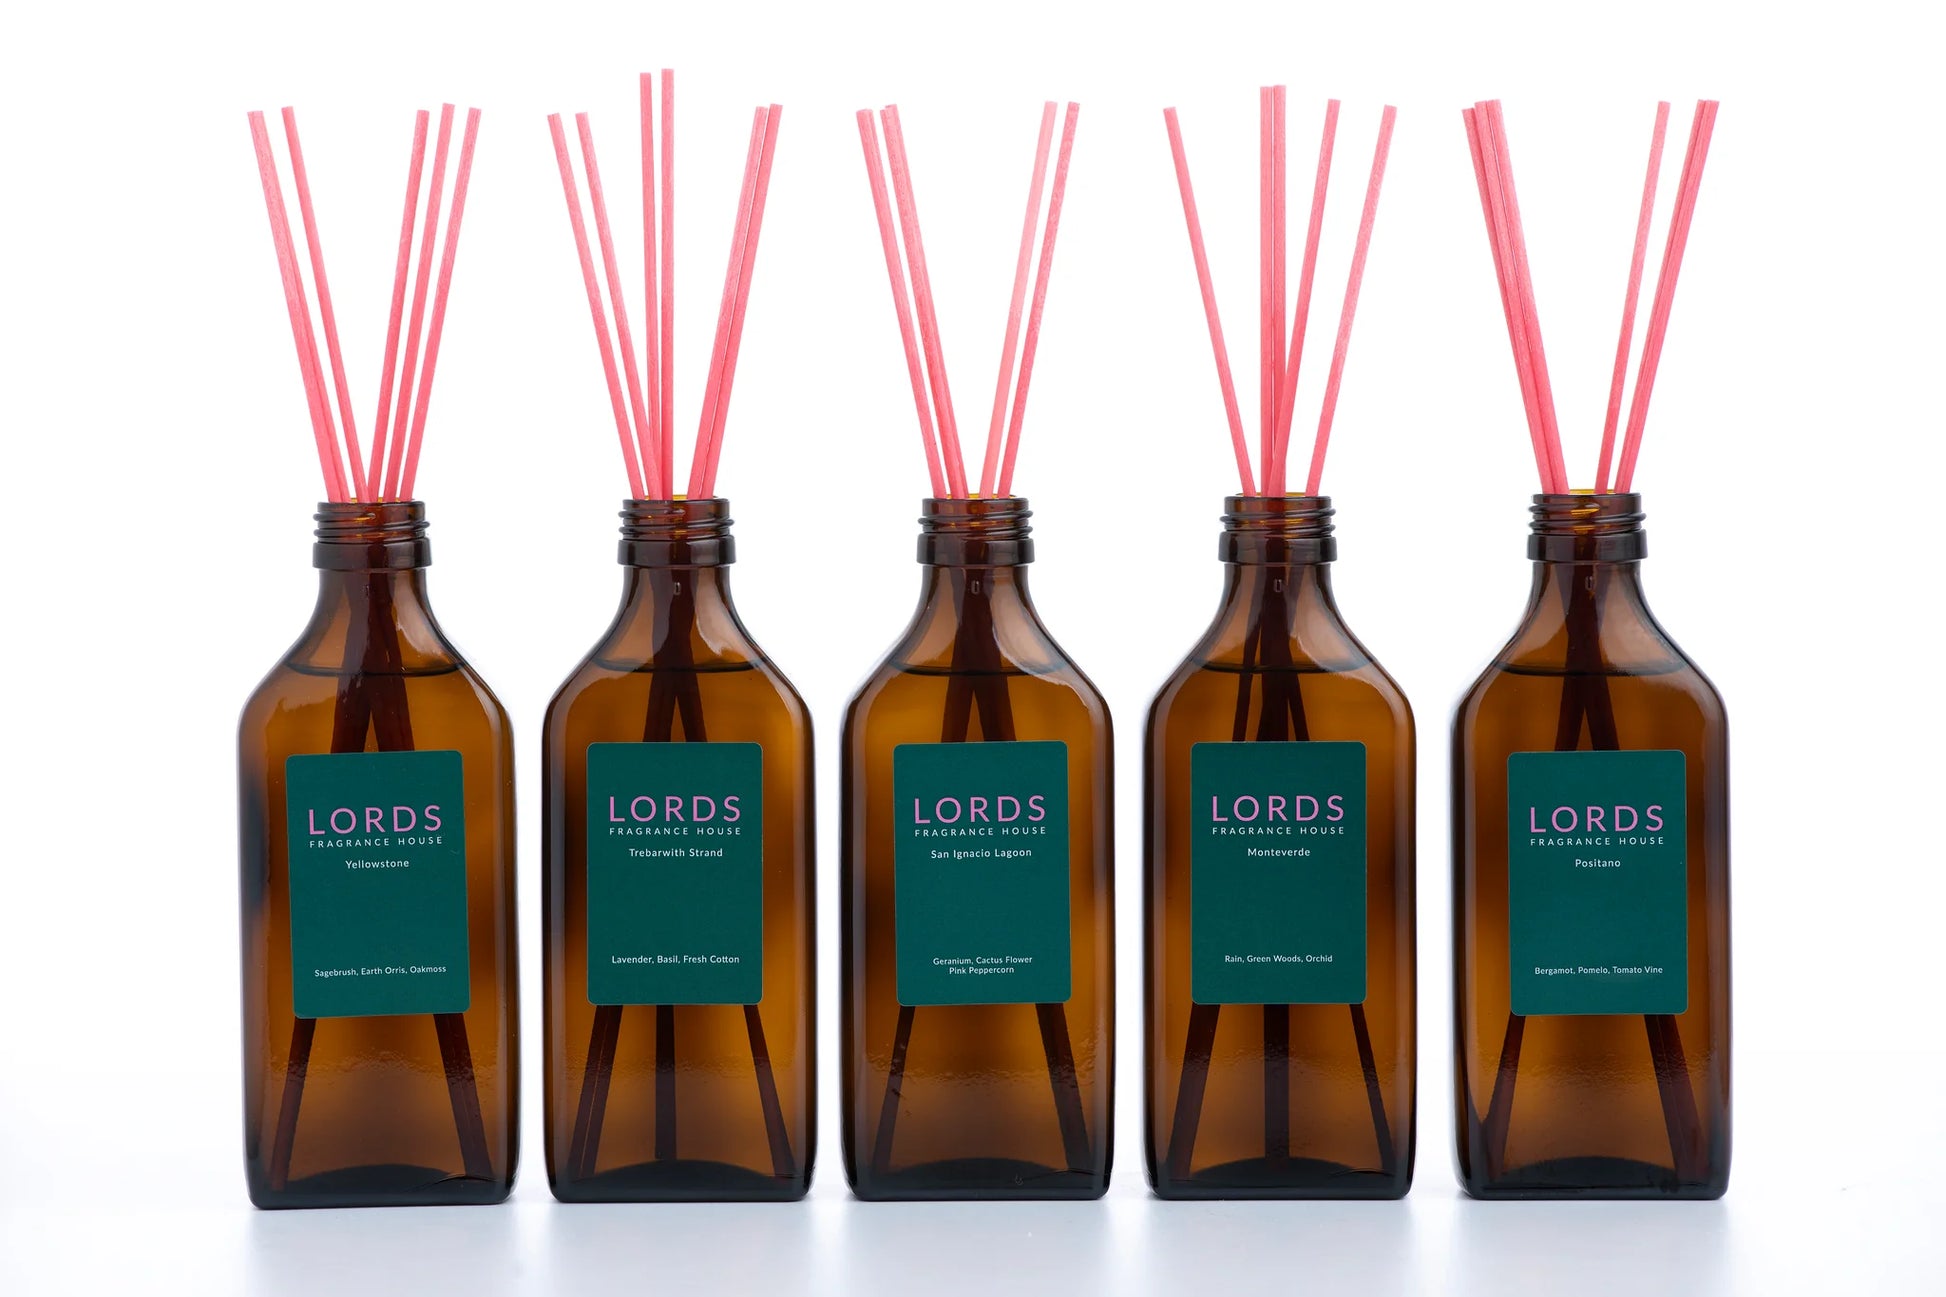 Lords 200ml reed diffusers in a choice of 5 scents